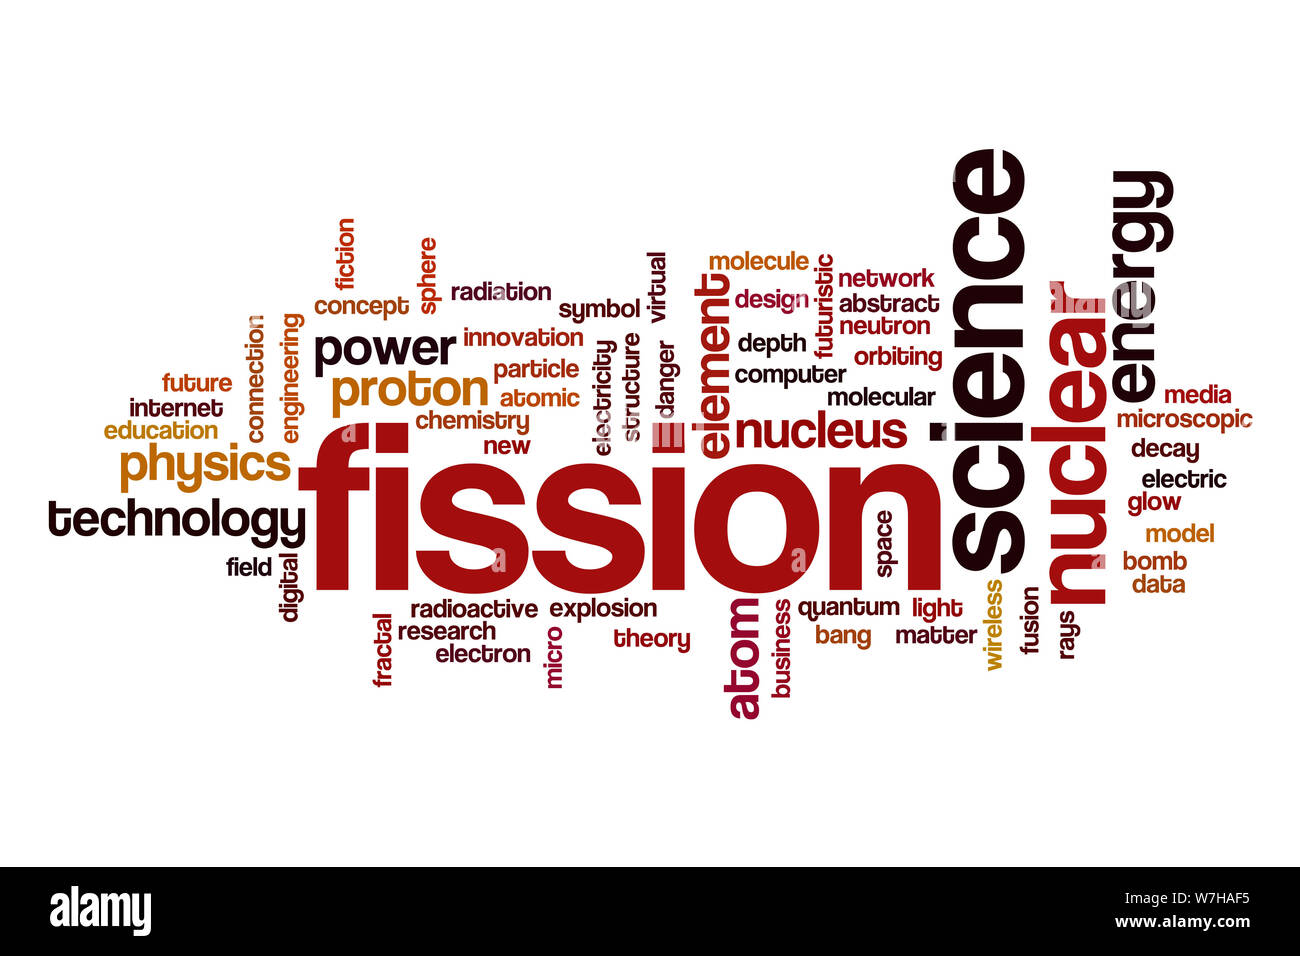 Fission word cloud concept Stock Photo